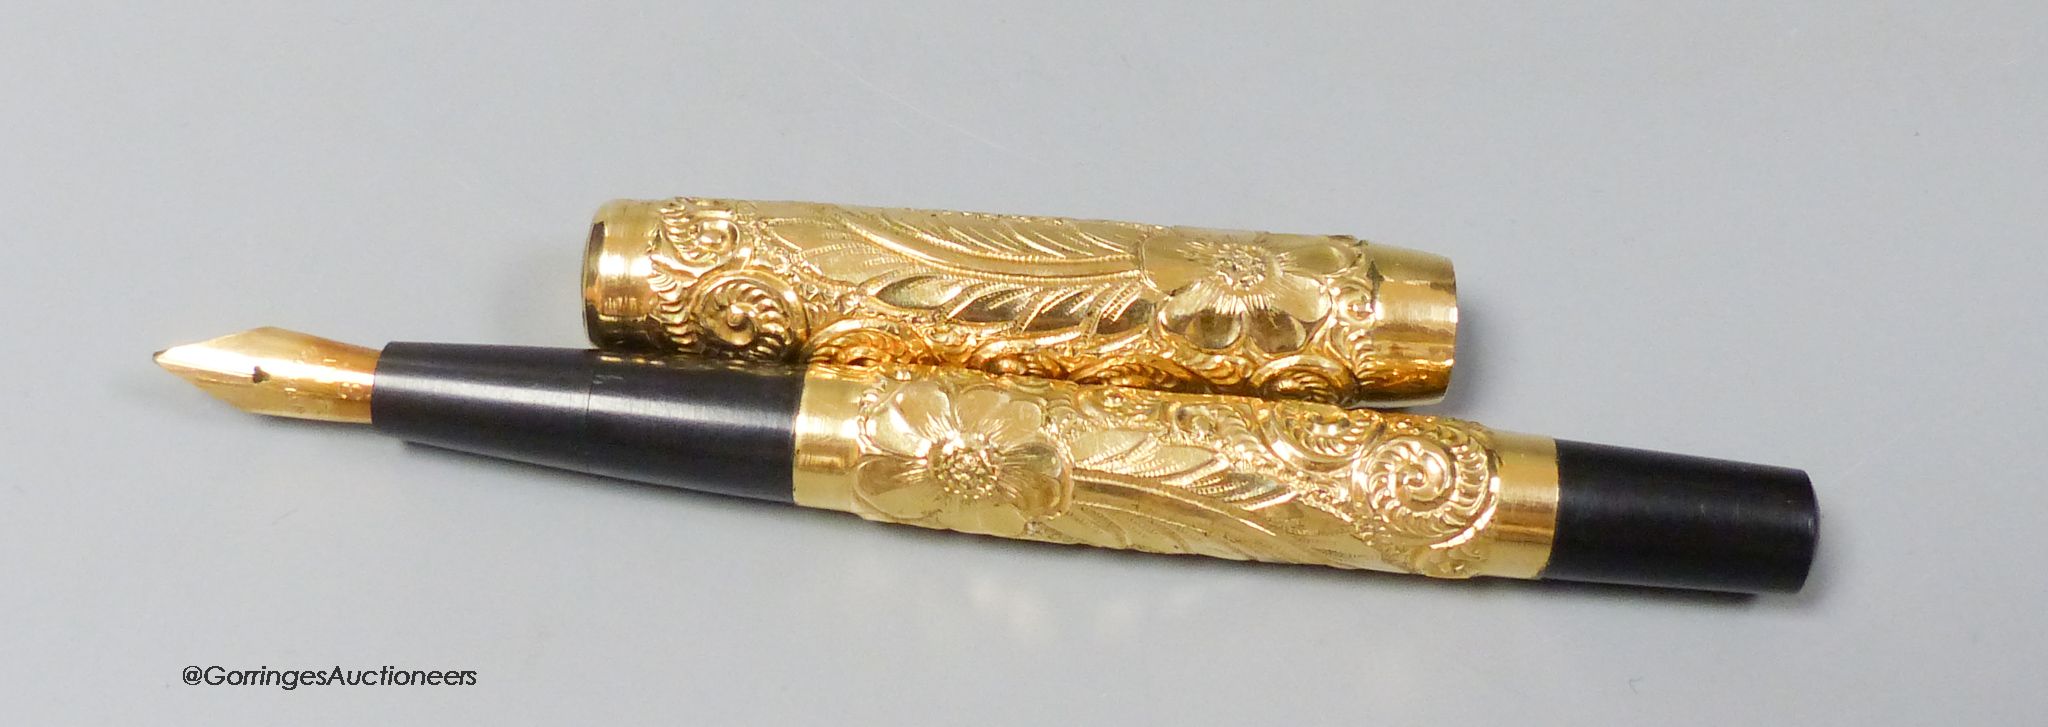 A 1920's gold plated eye-dropper fountain pen